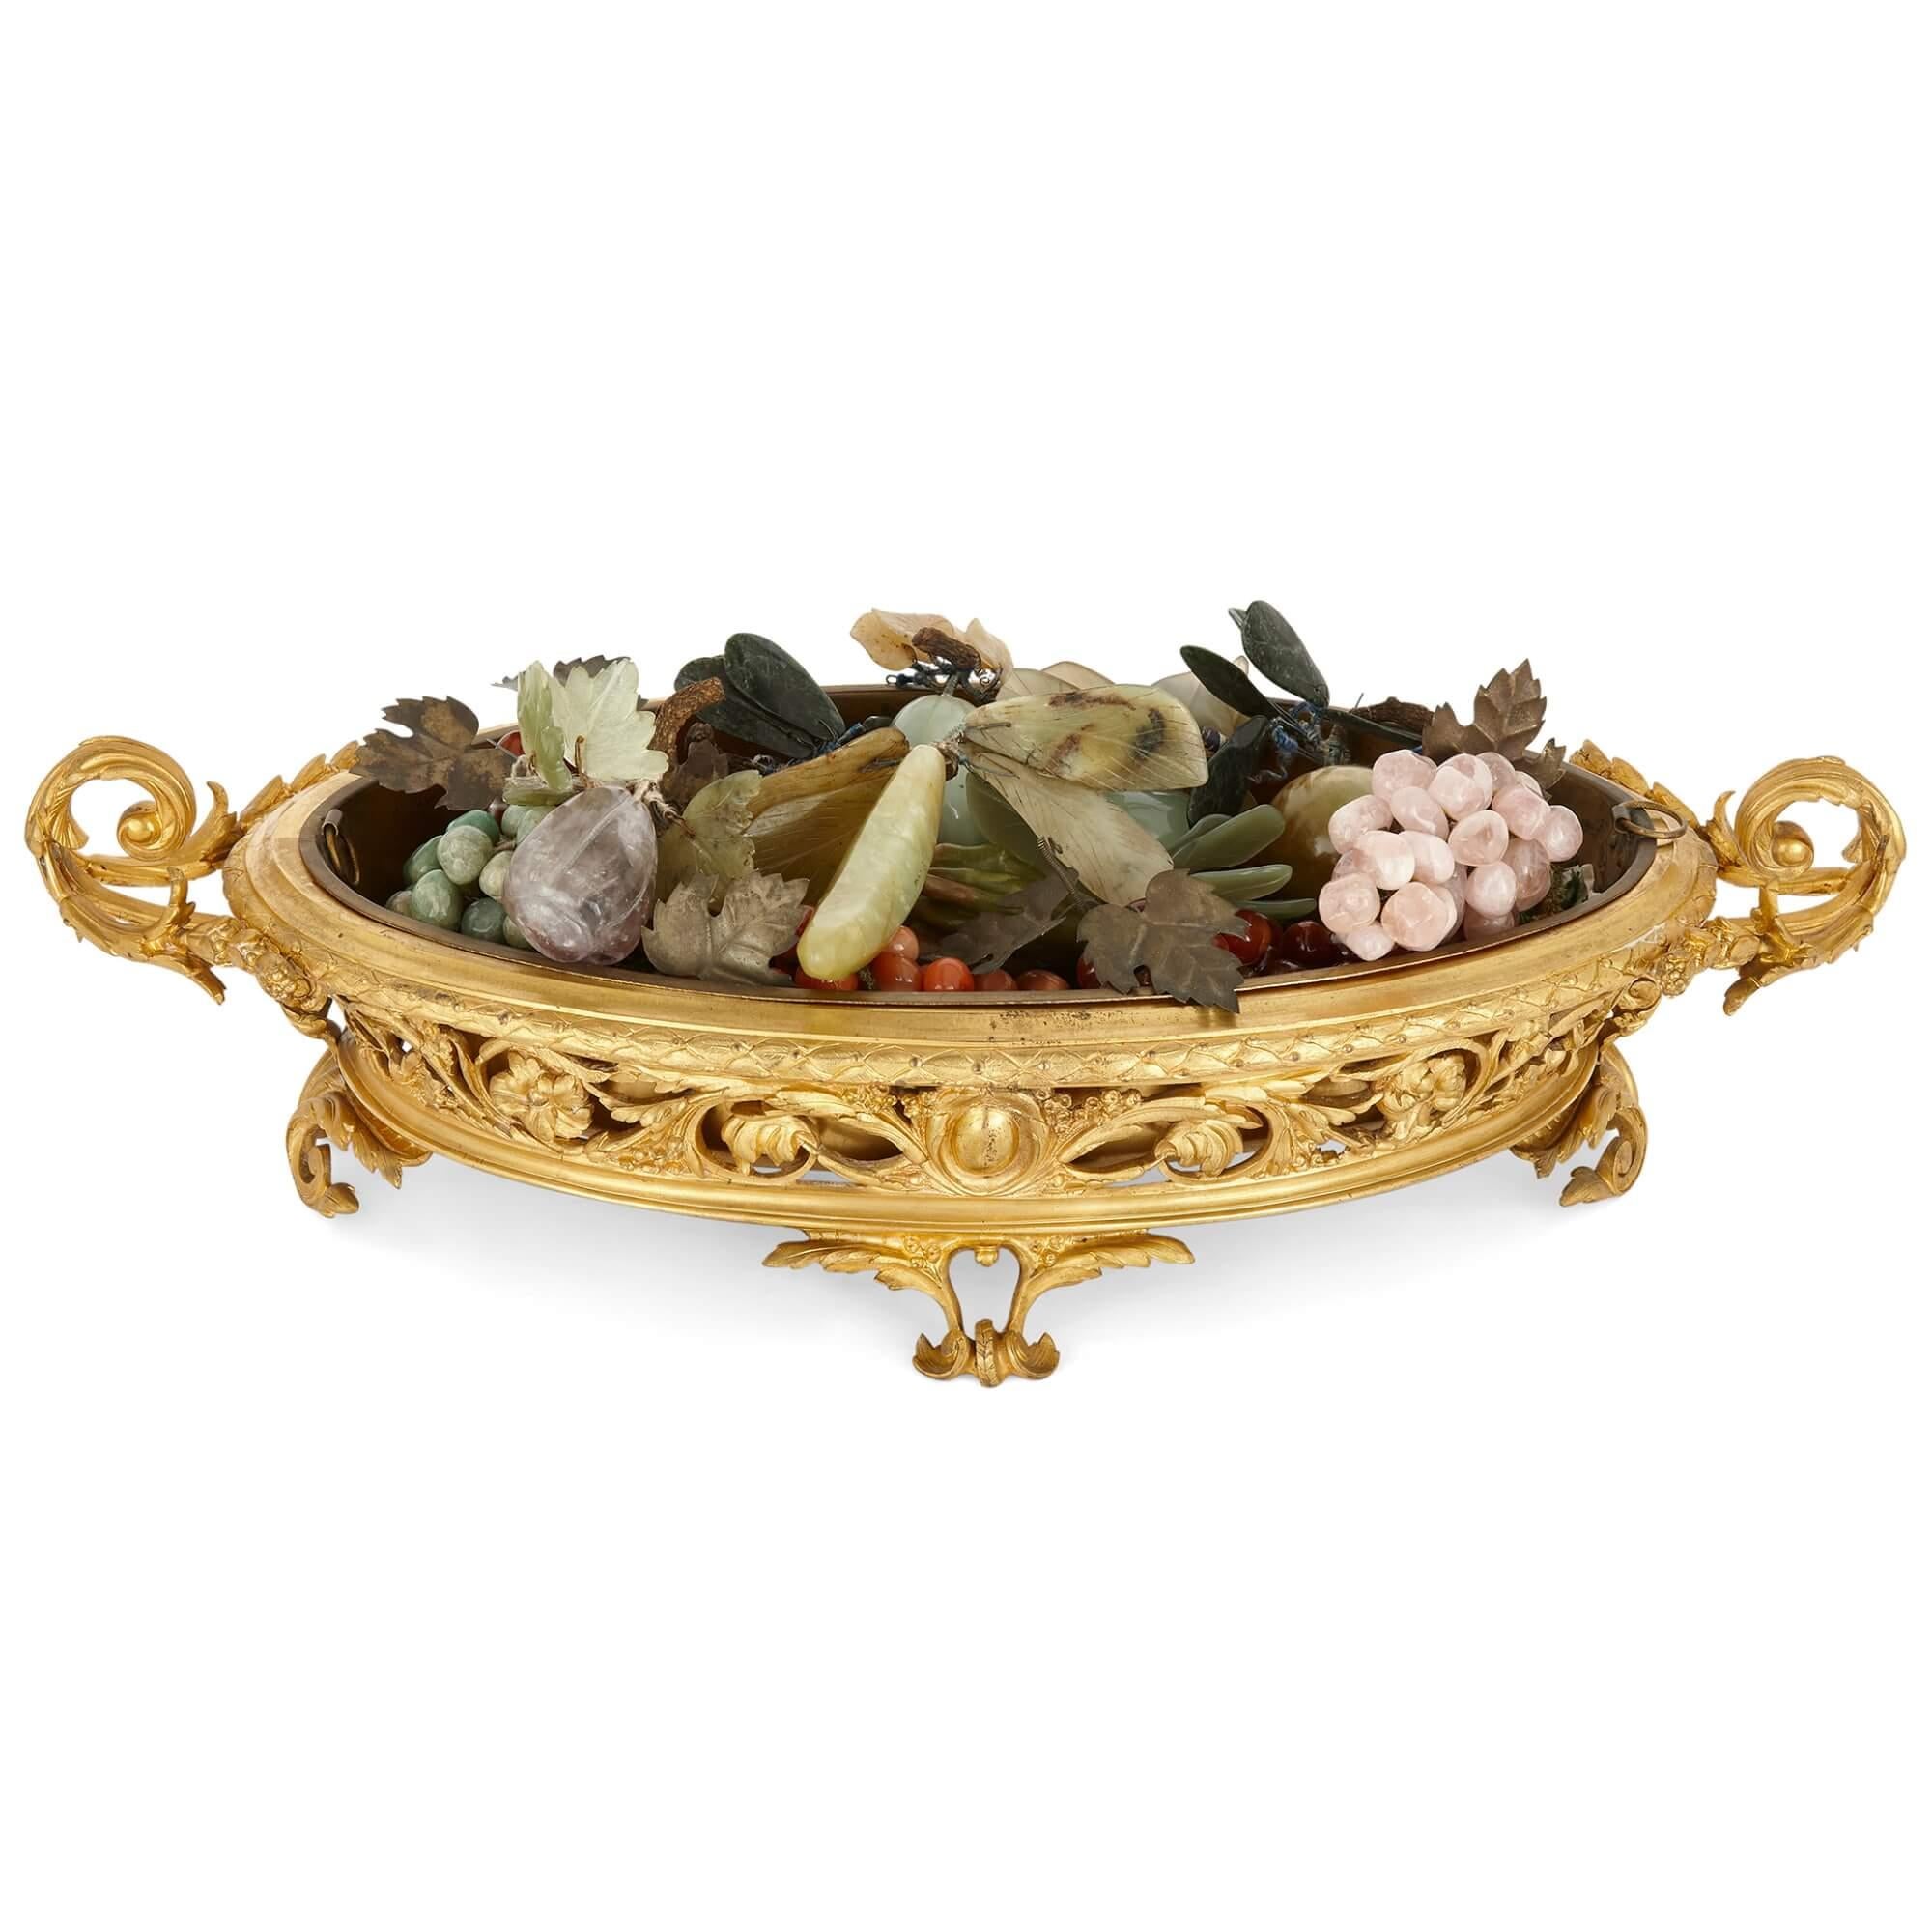 Gilt bronze jardinière with hardstone fruits
French, Early 20th Century 
Height 15cm, width 57cm, depth 26cm

The jardinière is wonderfully cast from gilt bronze and filled with a selection of polychrome hardstone fruits. 

The body of the